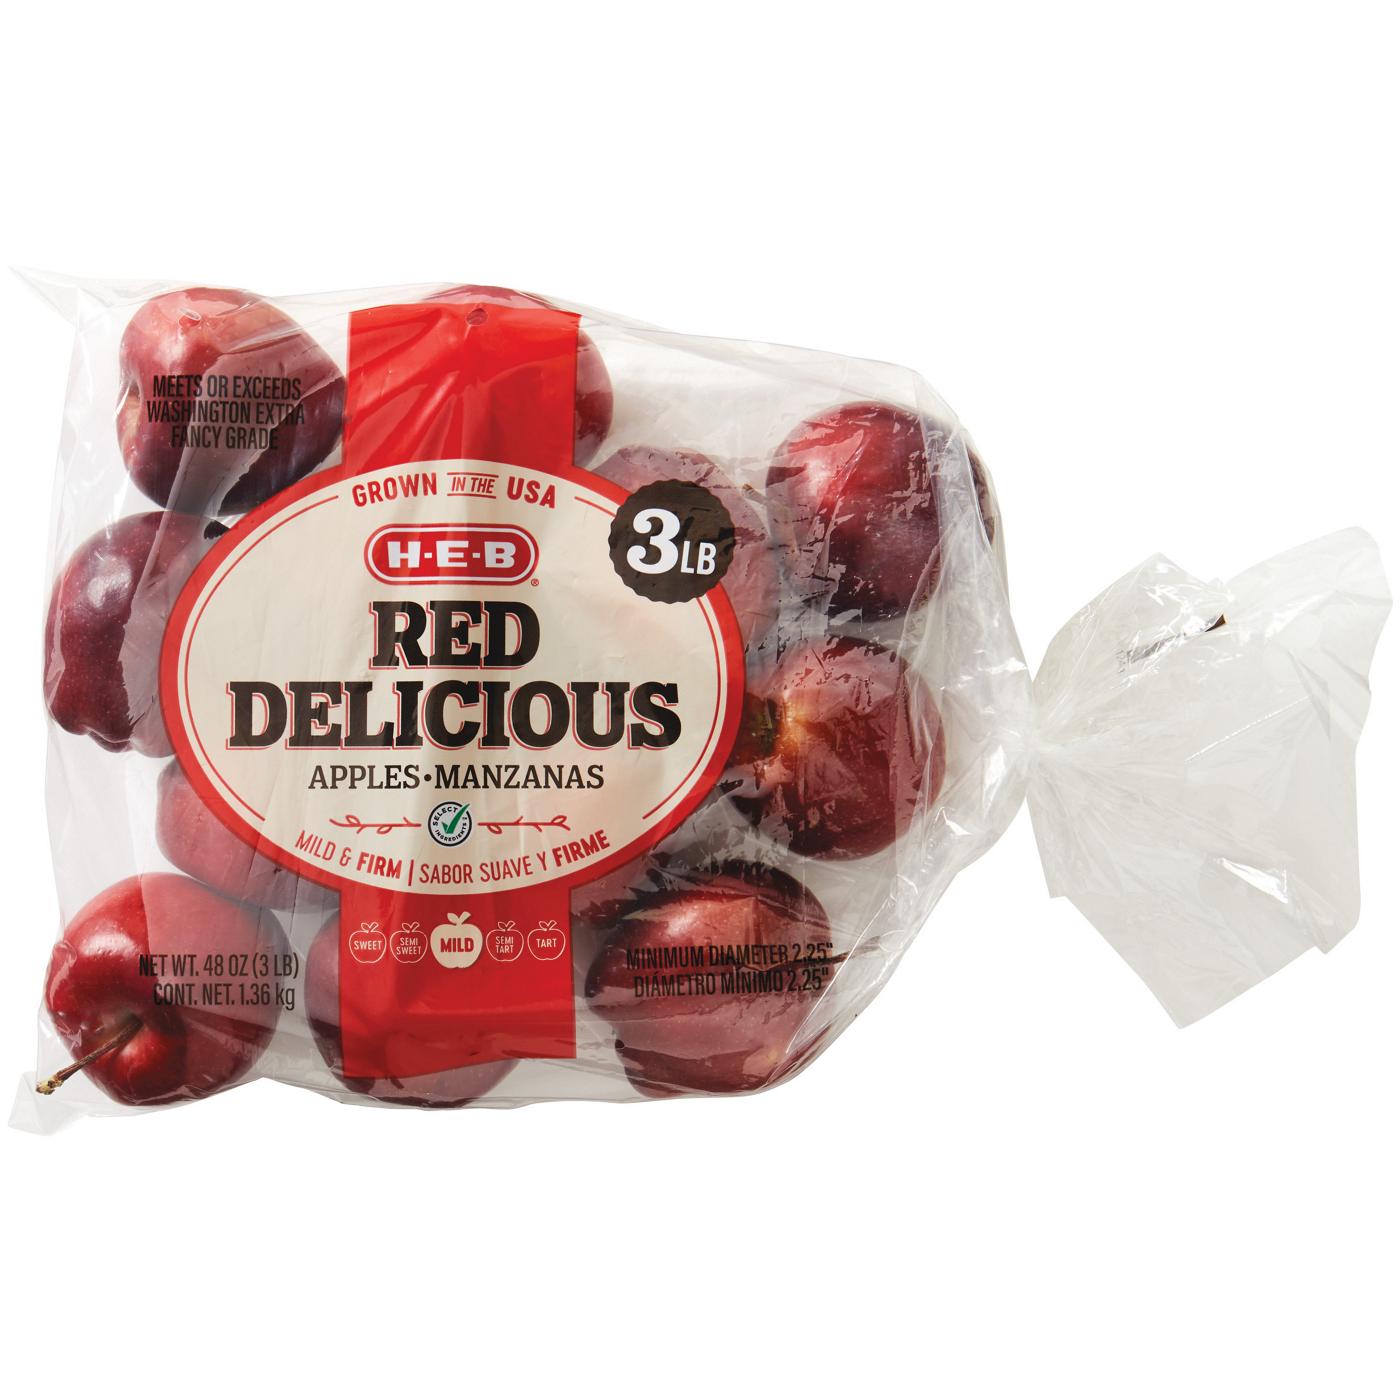 H-E-B Fresh Red Delicious Apples; image 1 of 2